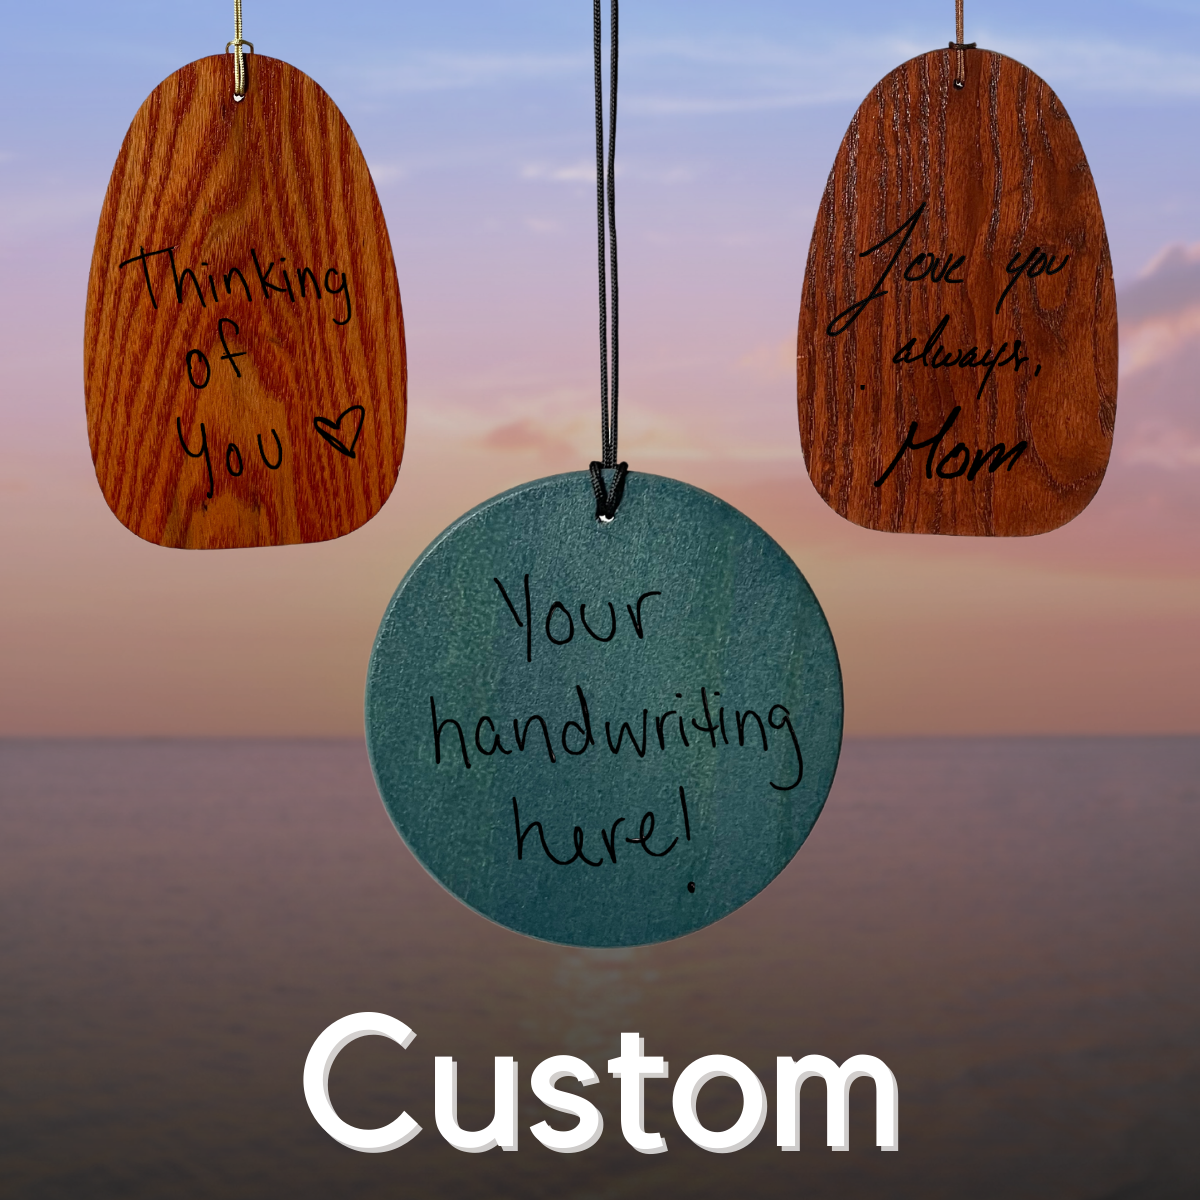 Customizable Wind Chimes: Design the Perfect Gift Online